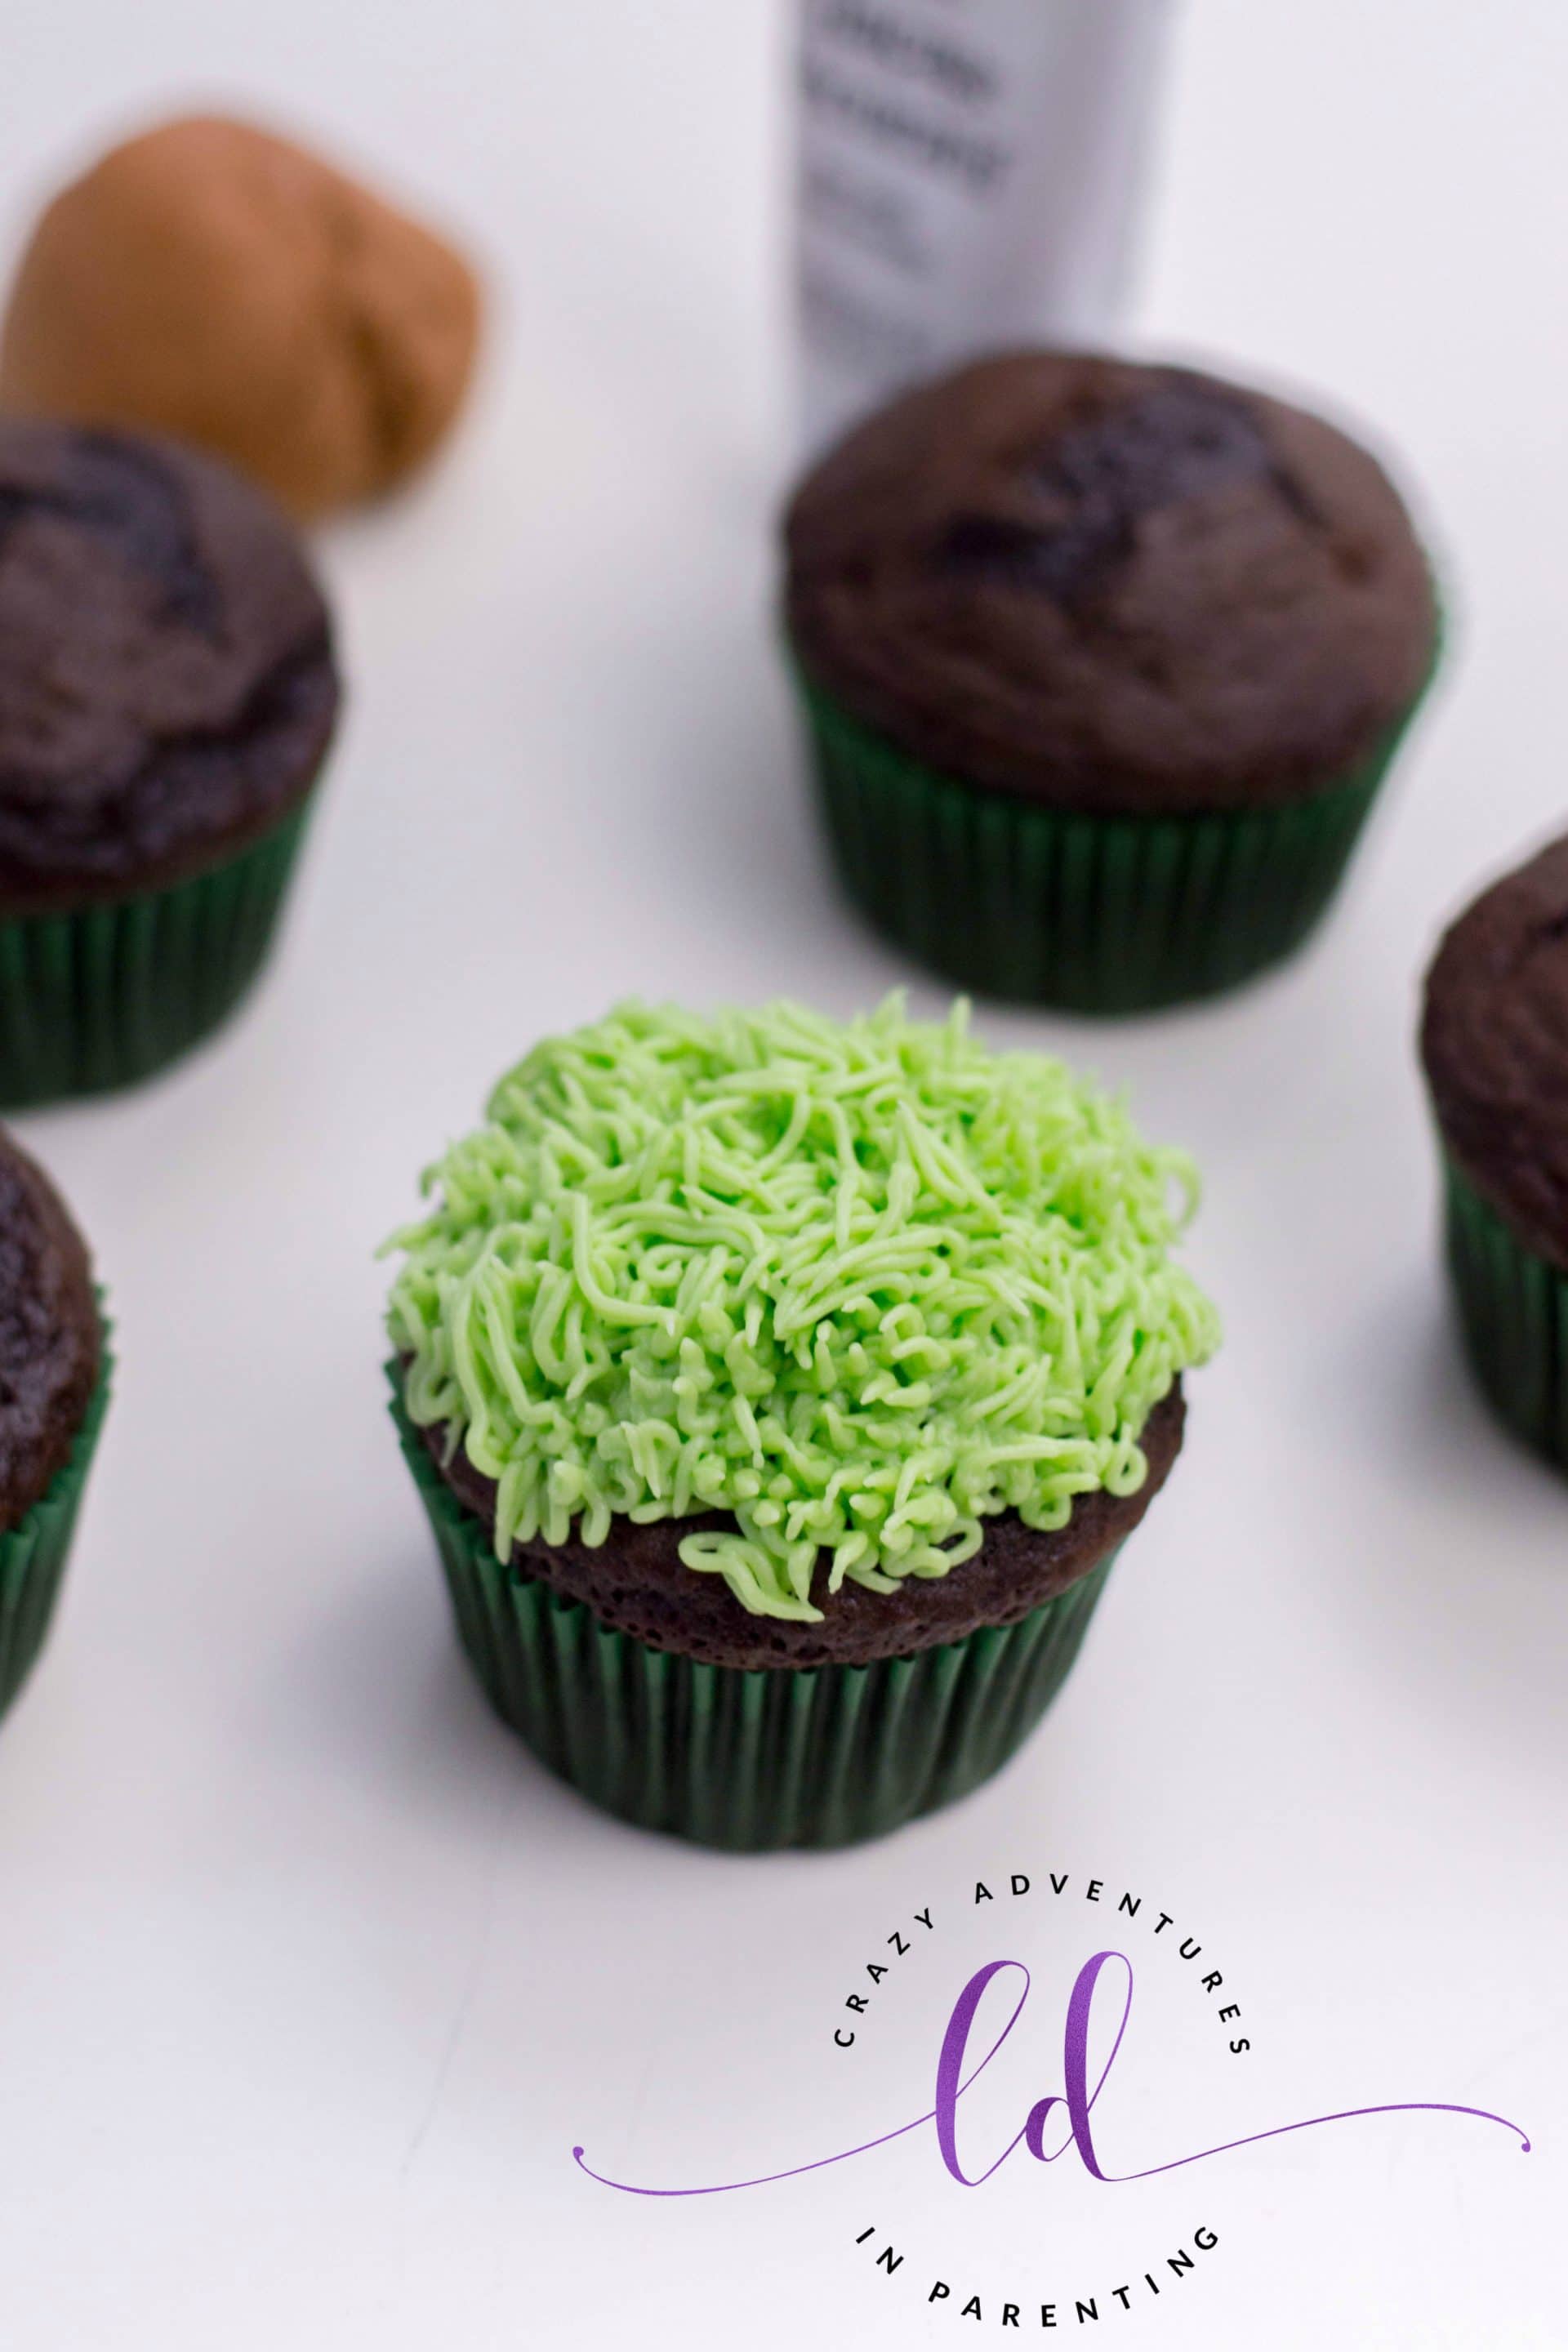 Frosting Grass on Football Cupcakes